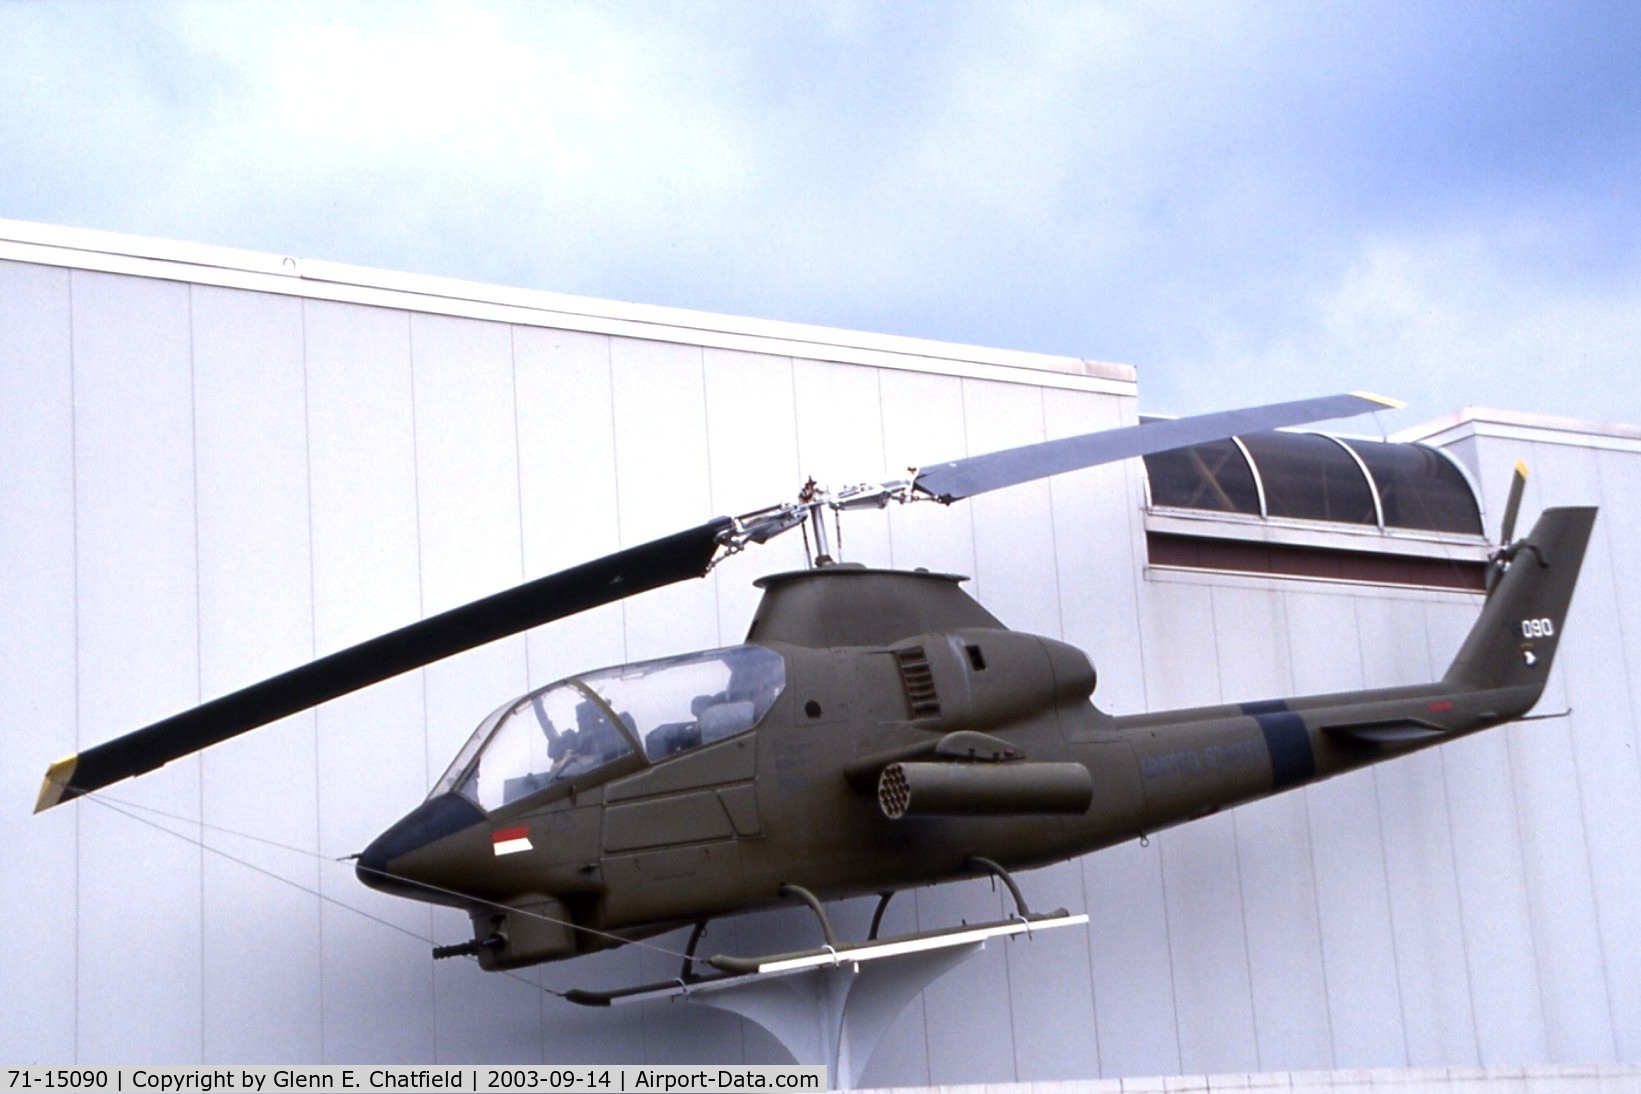 71-15090, 1971 Bell AH-1G Cobra C/N 21050, AH-1F mounted at the Army Aviation Museum